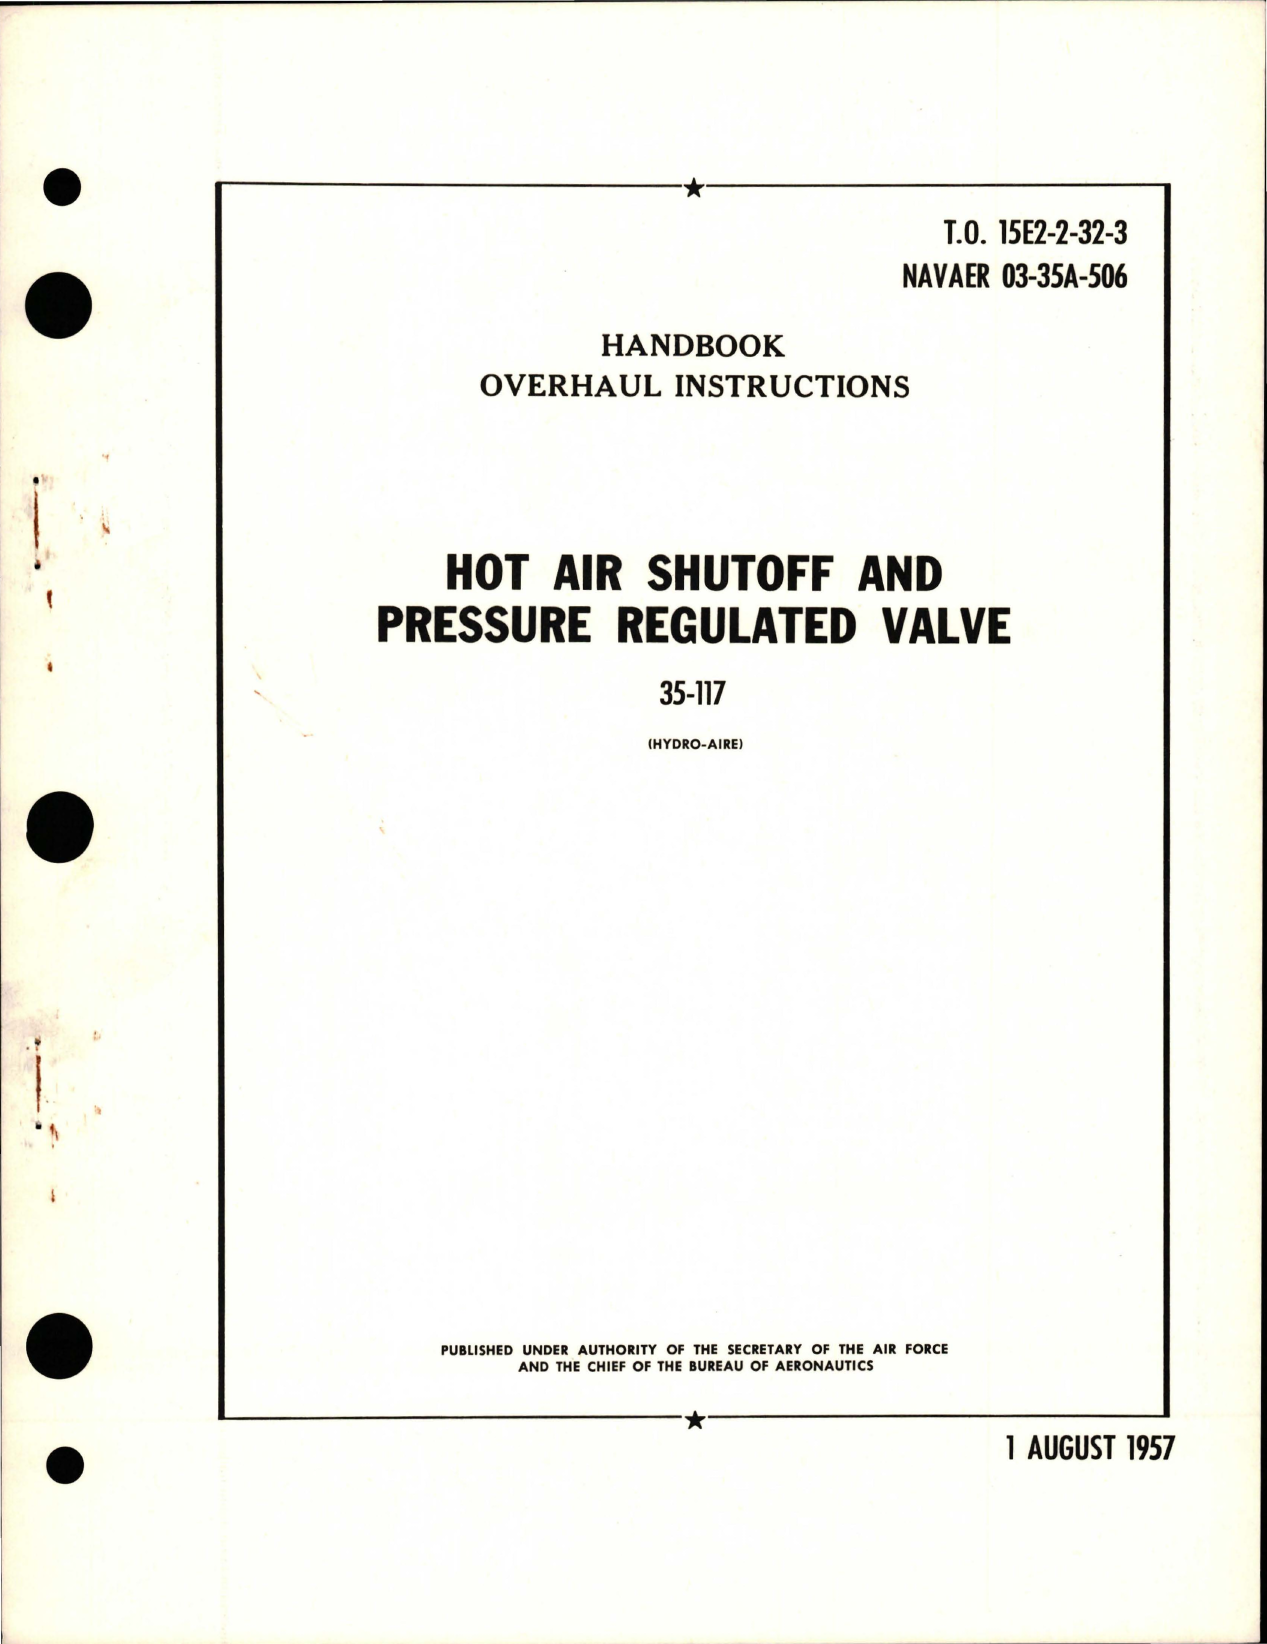 Sample page 1 from AirCorps Library document: Overhaul Instructions for Hot Air Shutoff and Pressure Regulated Valve - 35-117